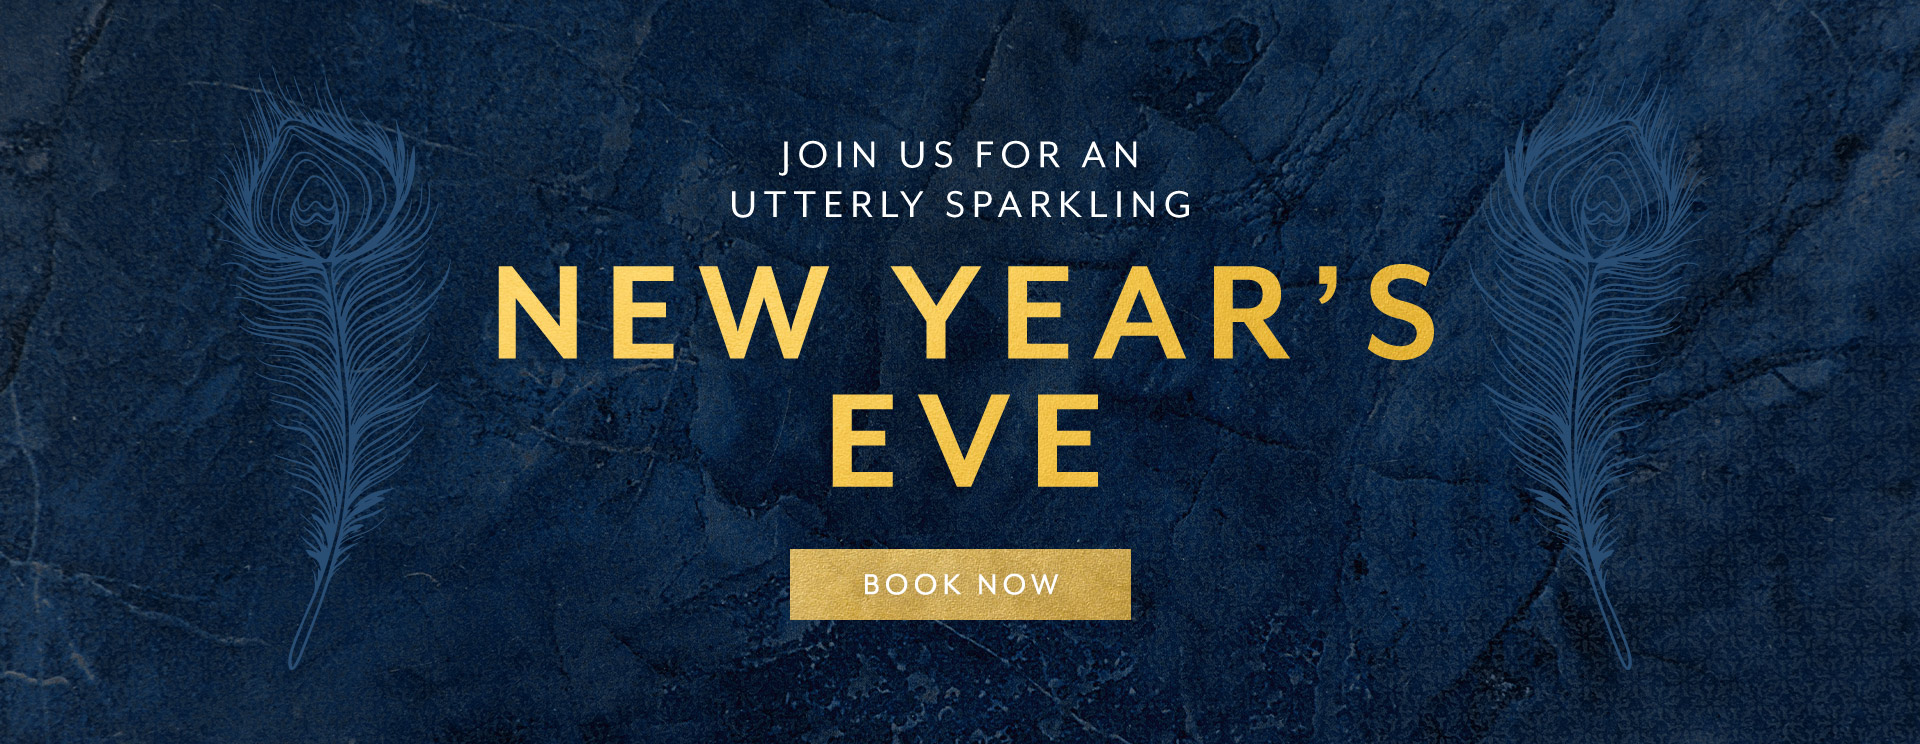 New Year's Eve at The Coombe Cellars